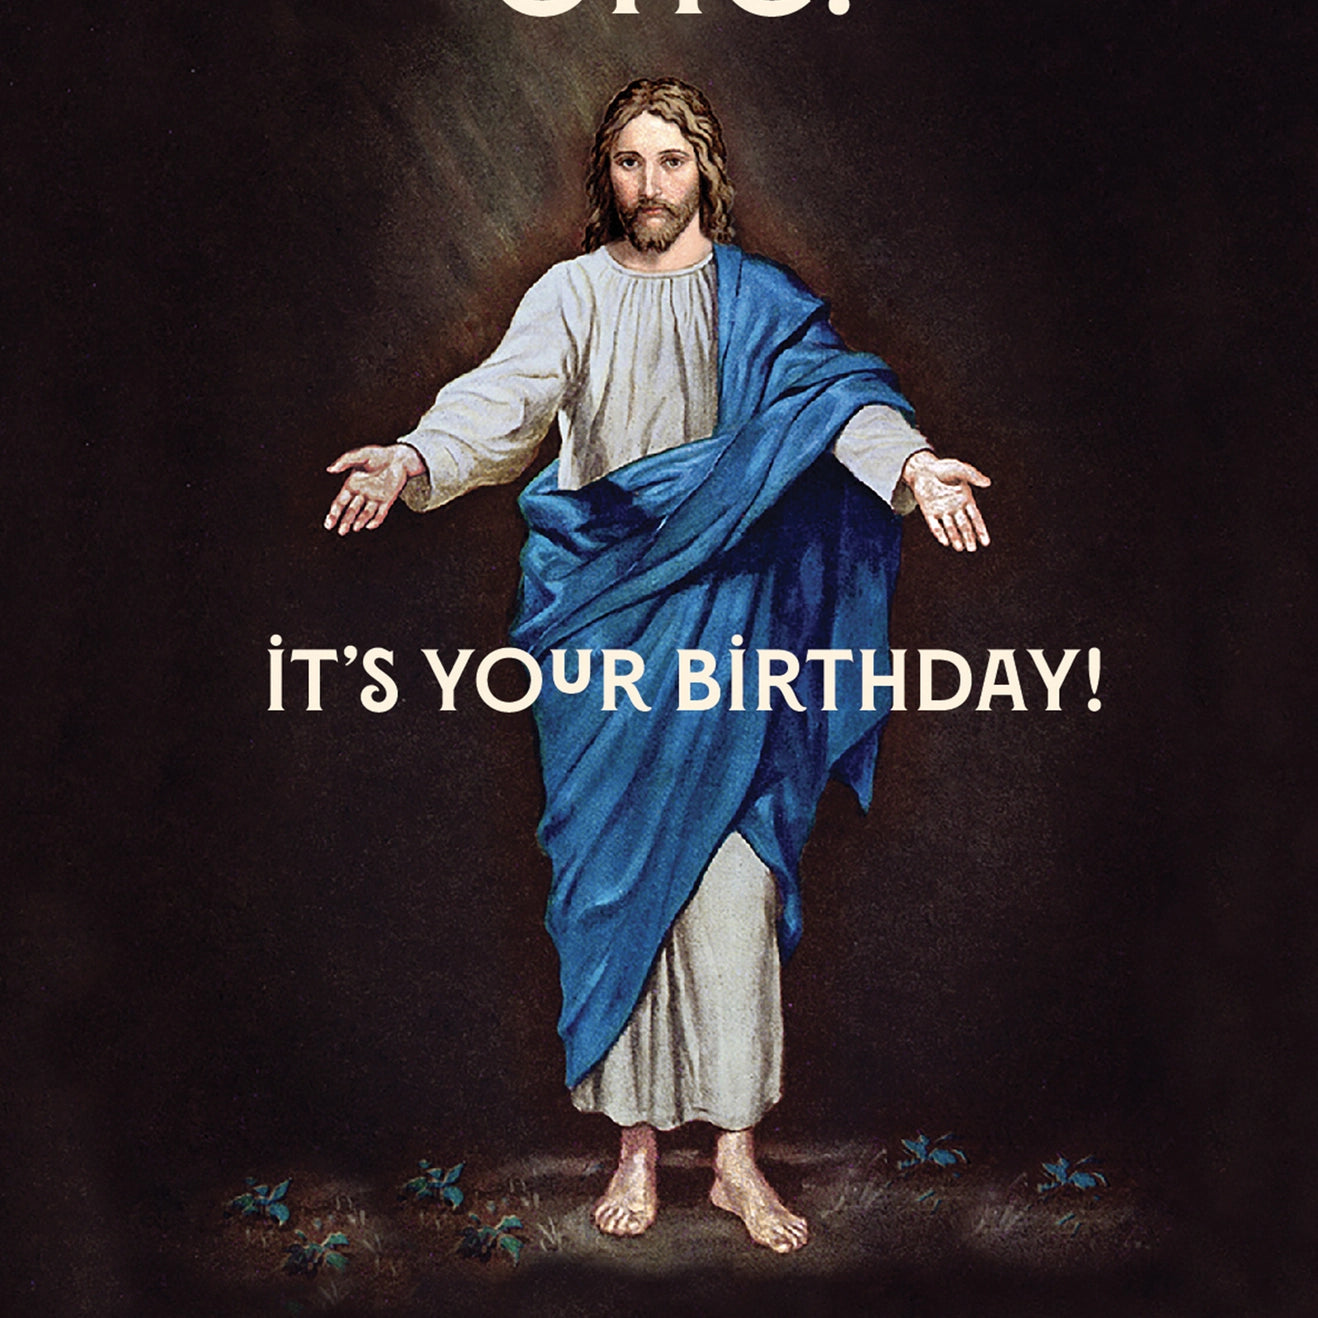 OMG It's Your Birthday Jesus Greeting Card